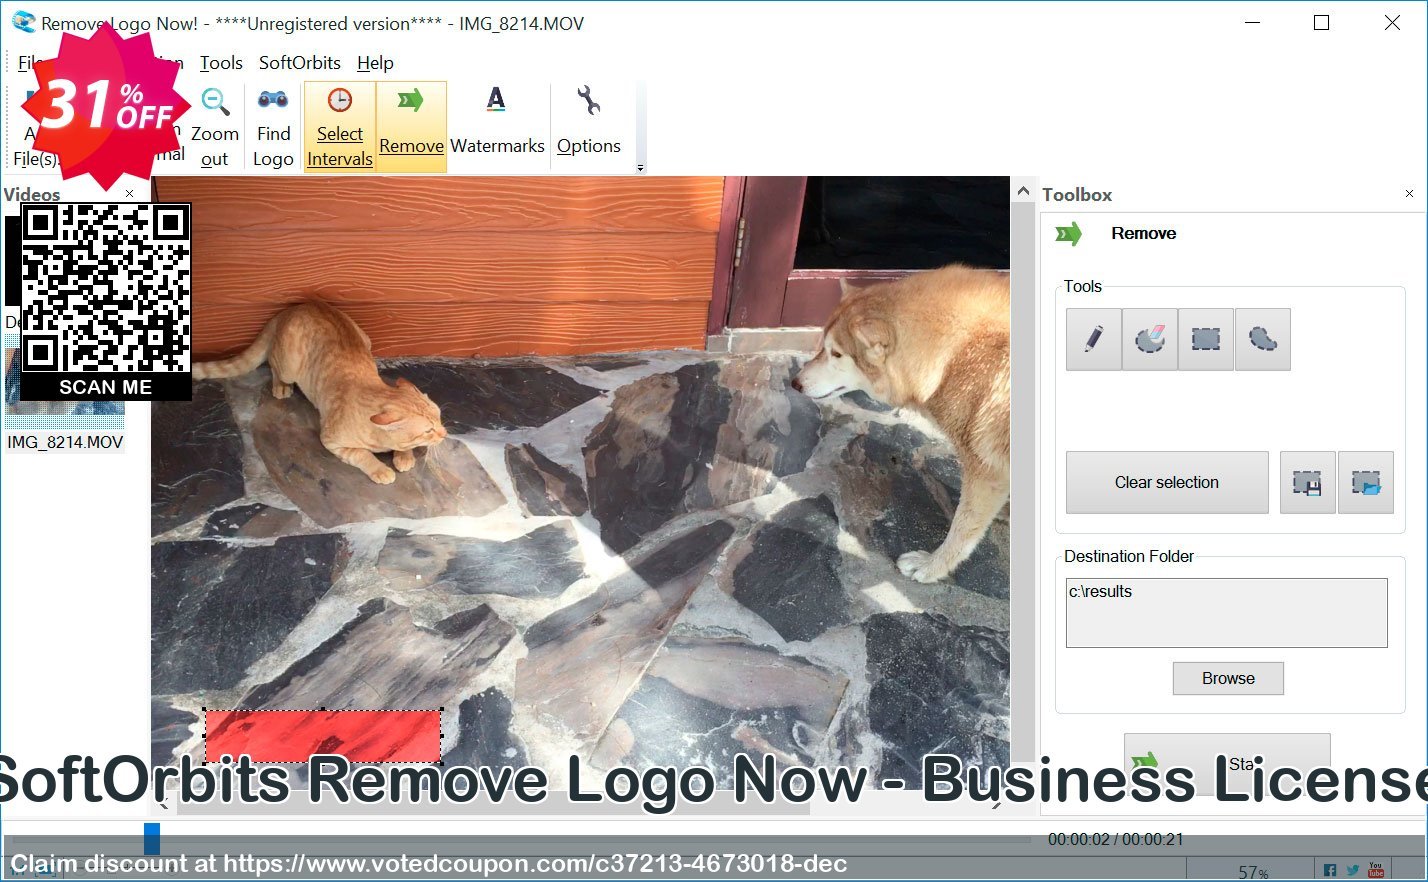 SoftOrbits Remove Logo Now - Business Plan Coupon, discount 30% Discount. Promotion: hottest offer code of Remove Logo Now! - Business License 2024